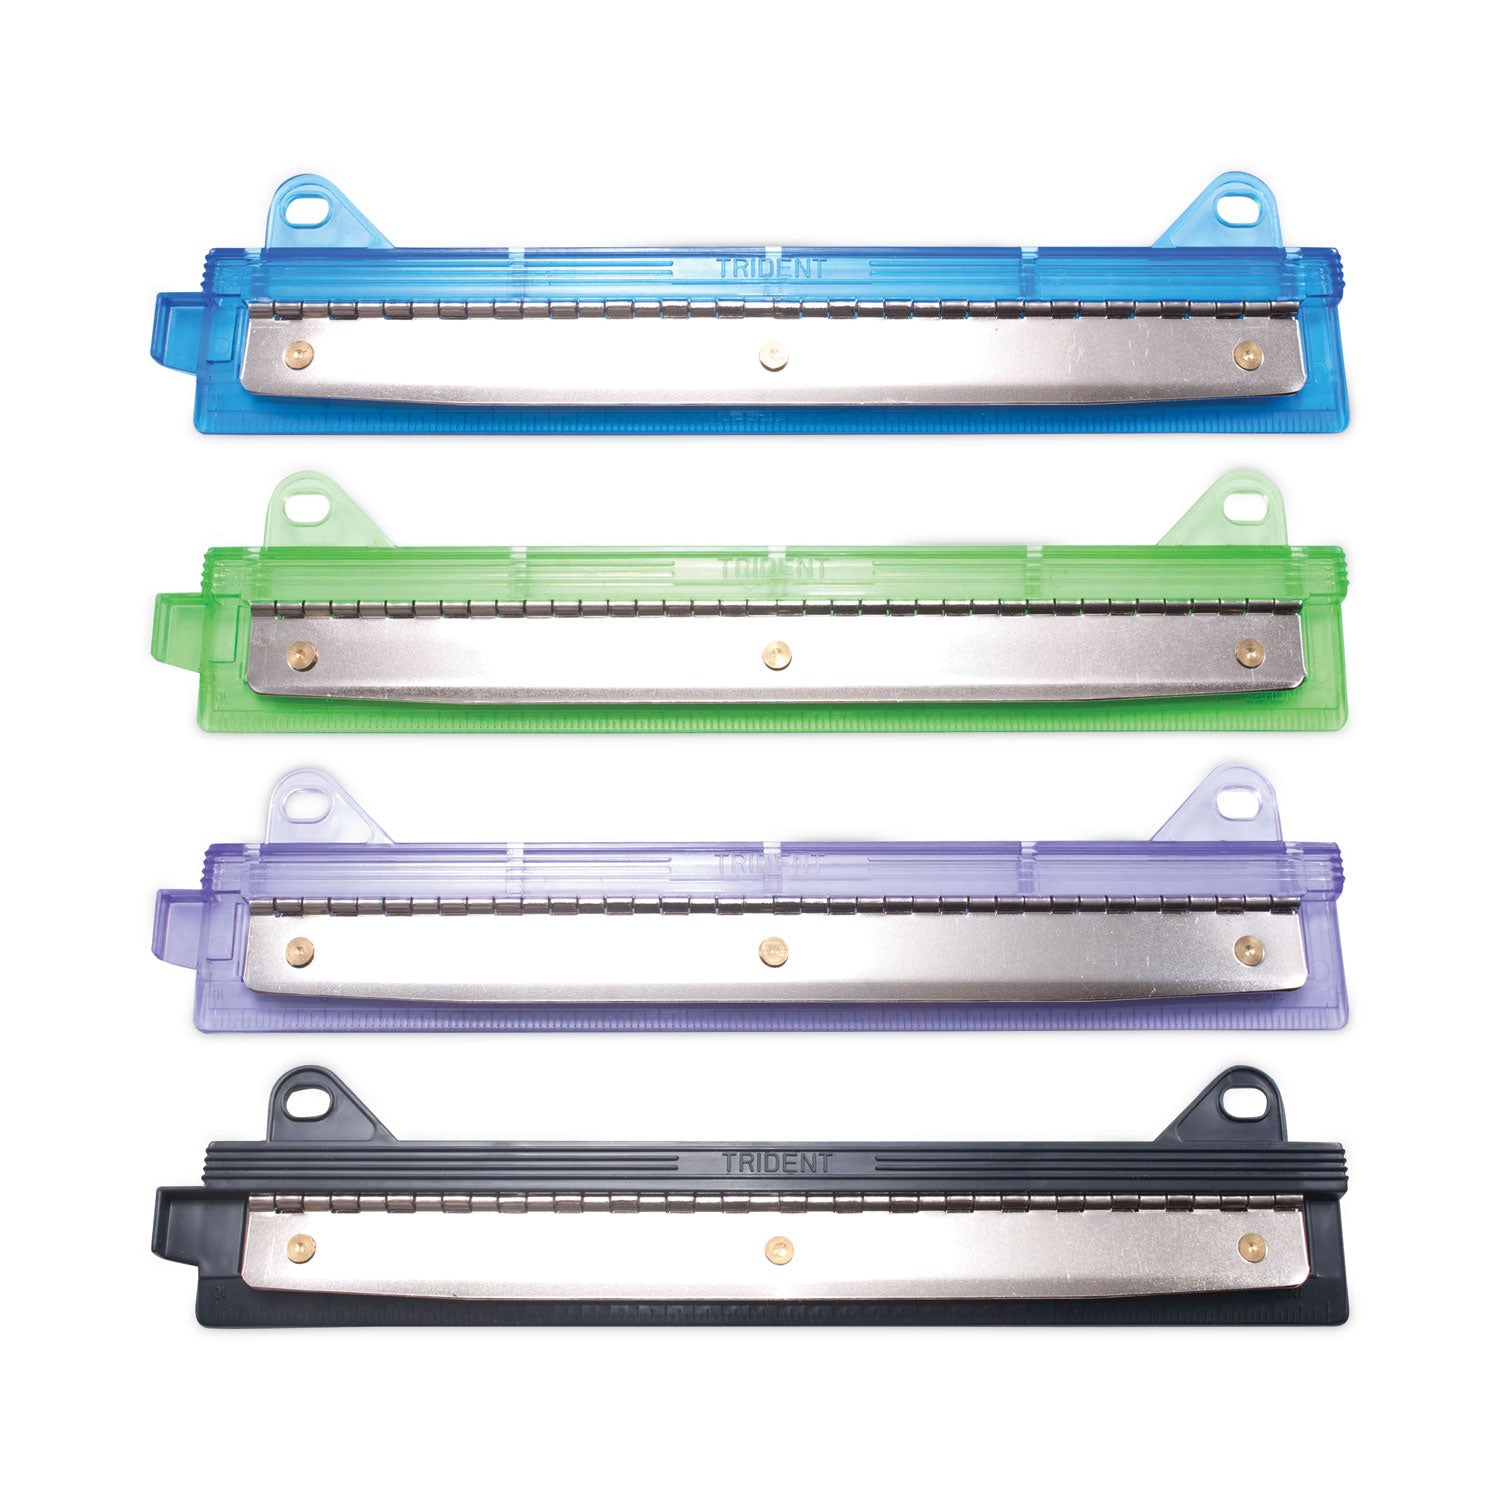 6-sheet-trident-binder-punch-three-hole-1-4-holes-assorted-colors_avtmcg600as - 1